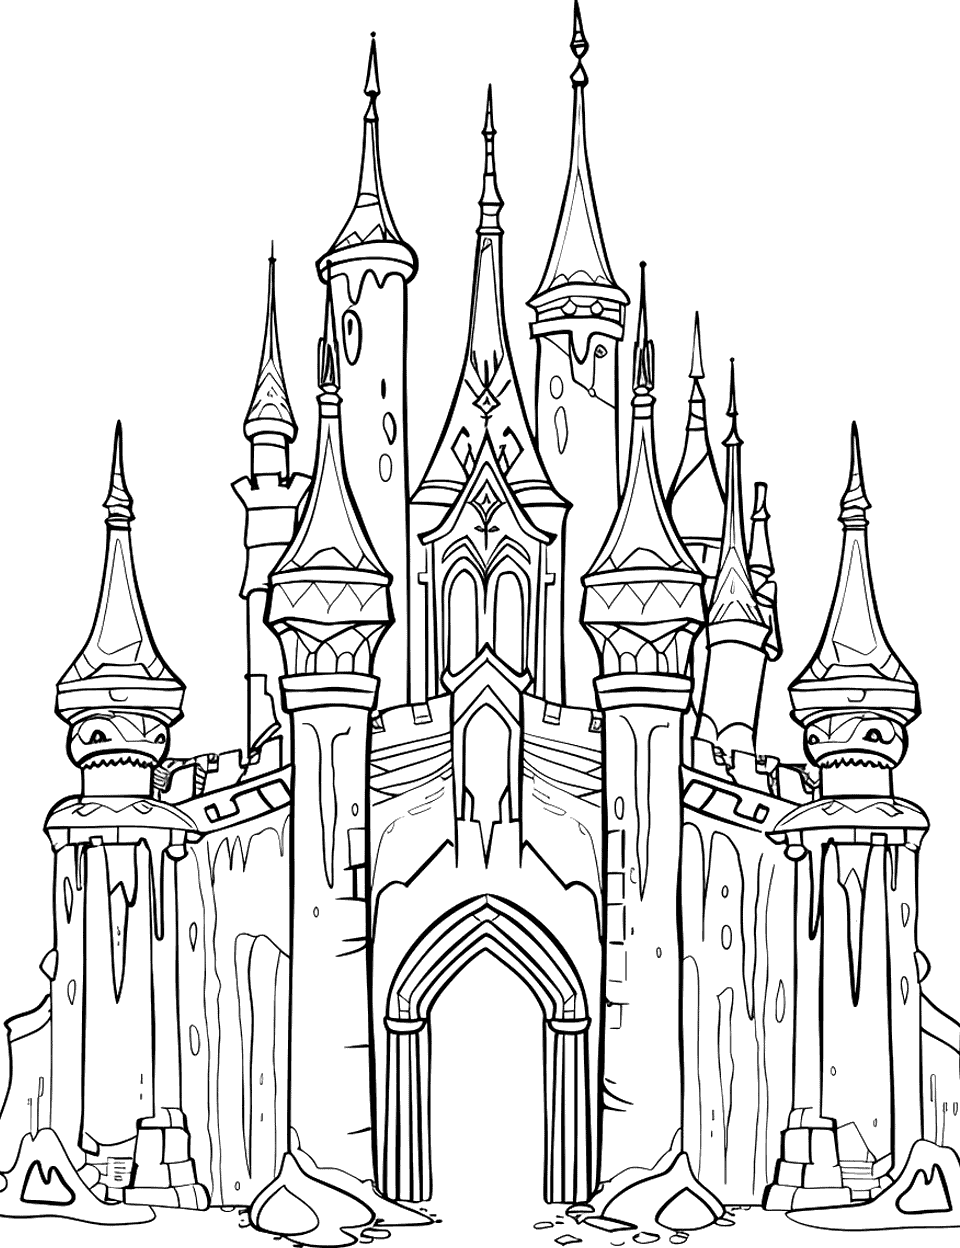 Frozen Ice Palace Castle Coloring Page - An ice castle inspired by Disney’s Frozen, with intricate ice sculptures.